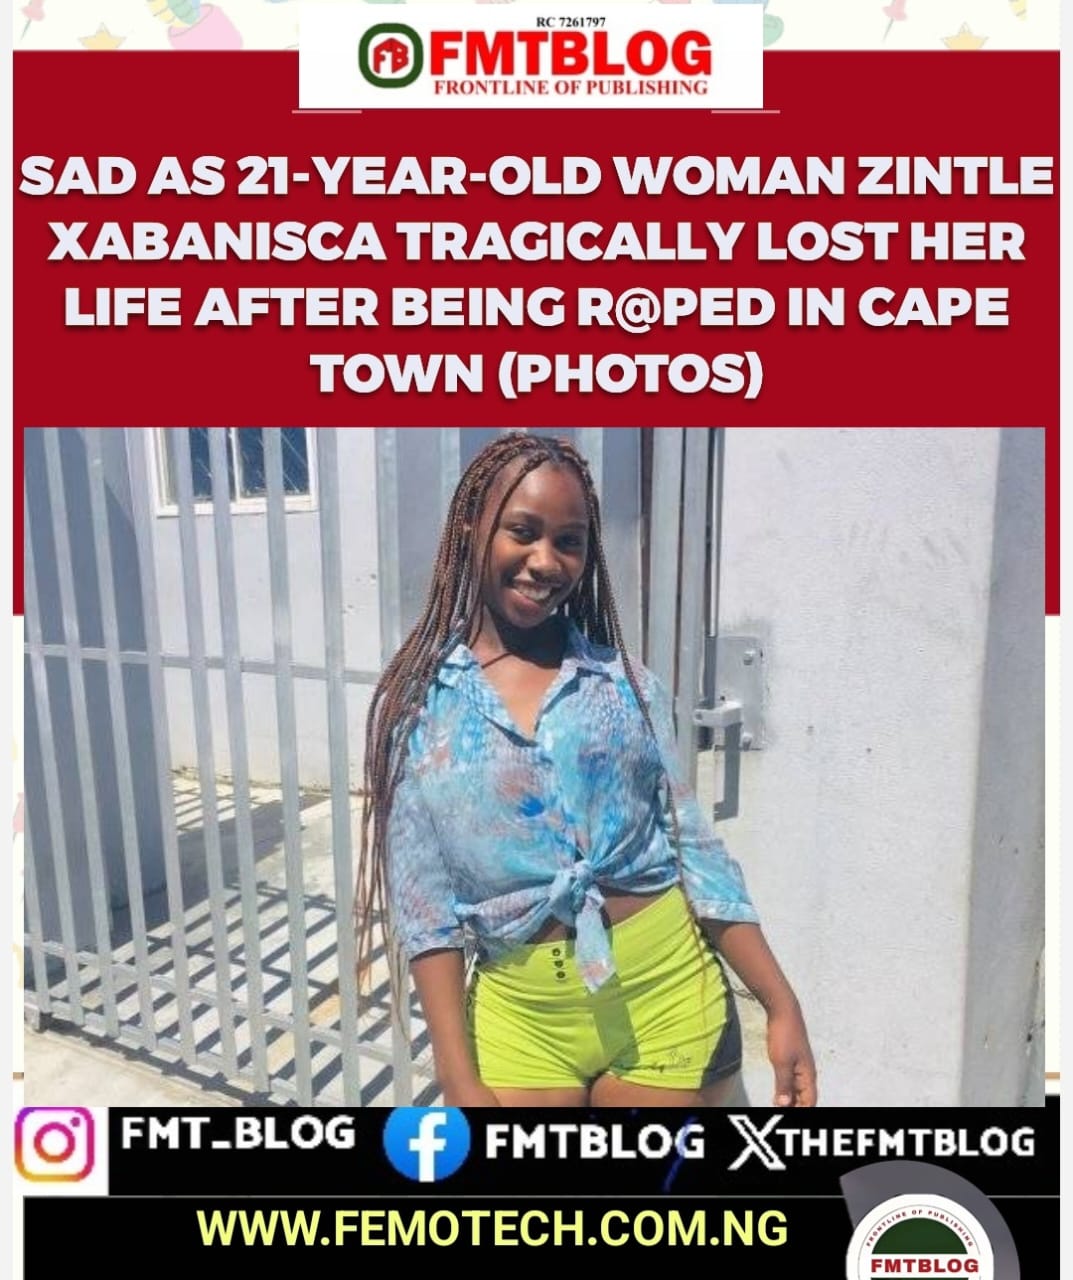 Sad As 21-Year-Old Woman Zintle Xabanisca Tragically Lost Her Life After Being R@ped In Cape Town (PHOTOS)